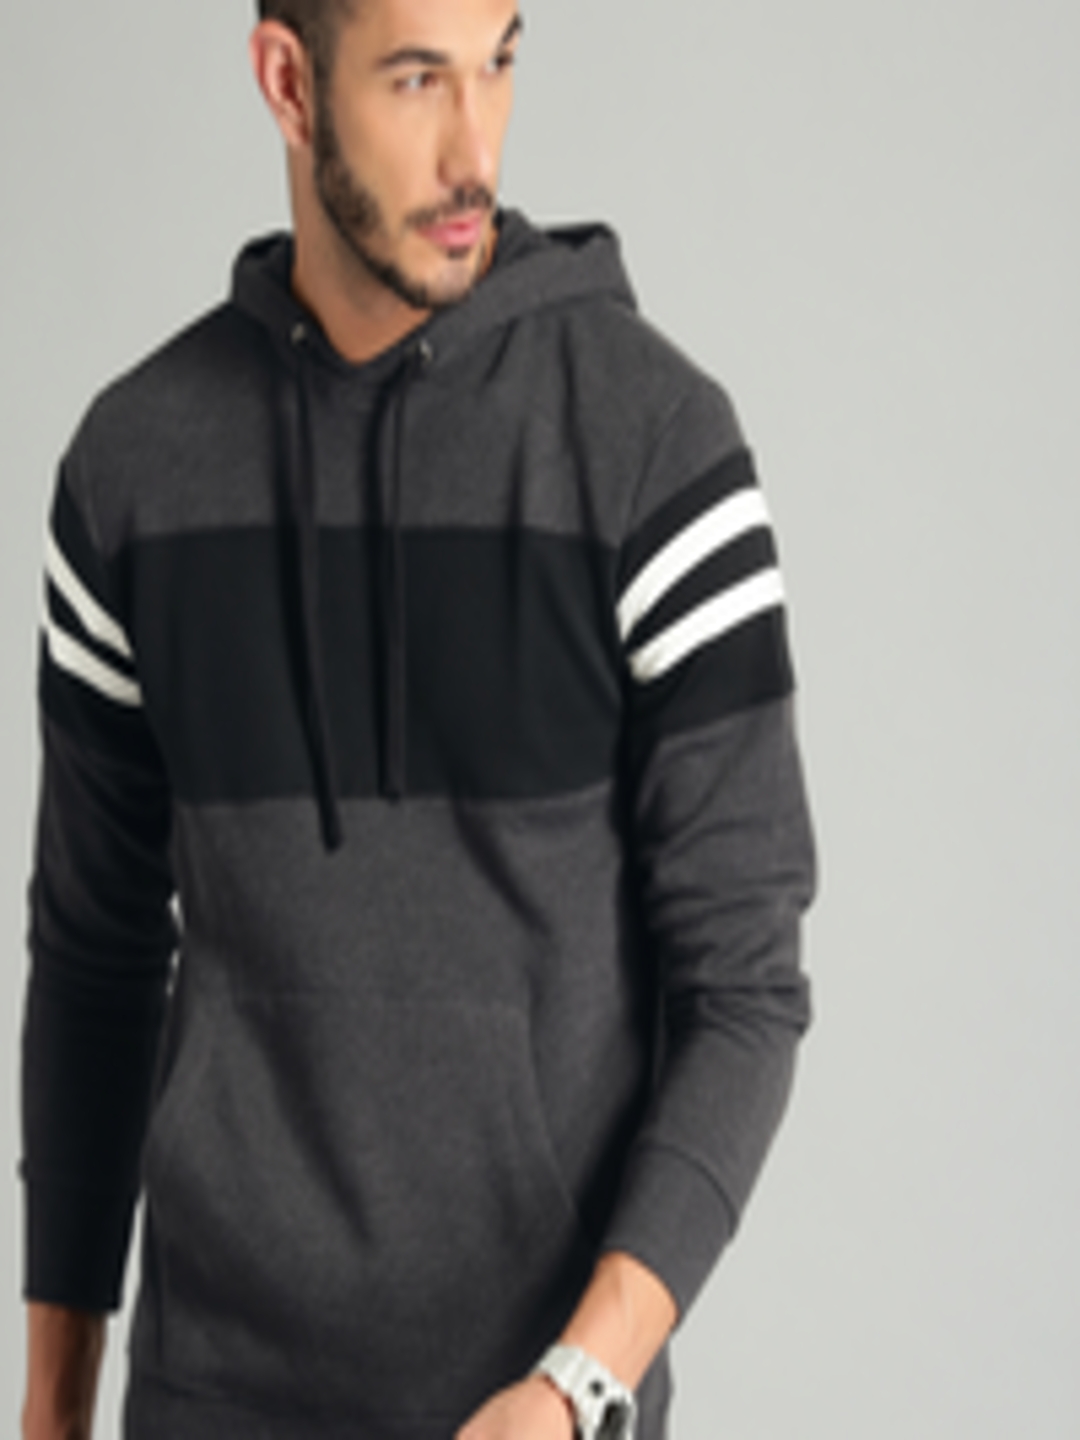 Buy The Roadster Lifestyle Co Men Charcoal Grey & Black Colourblocked ...